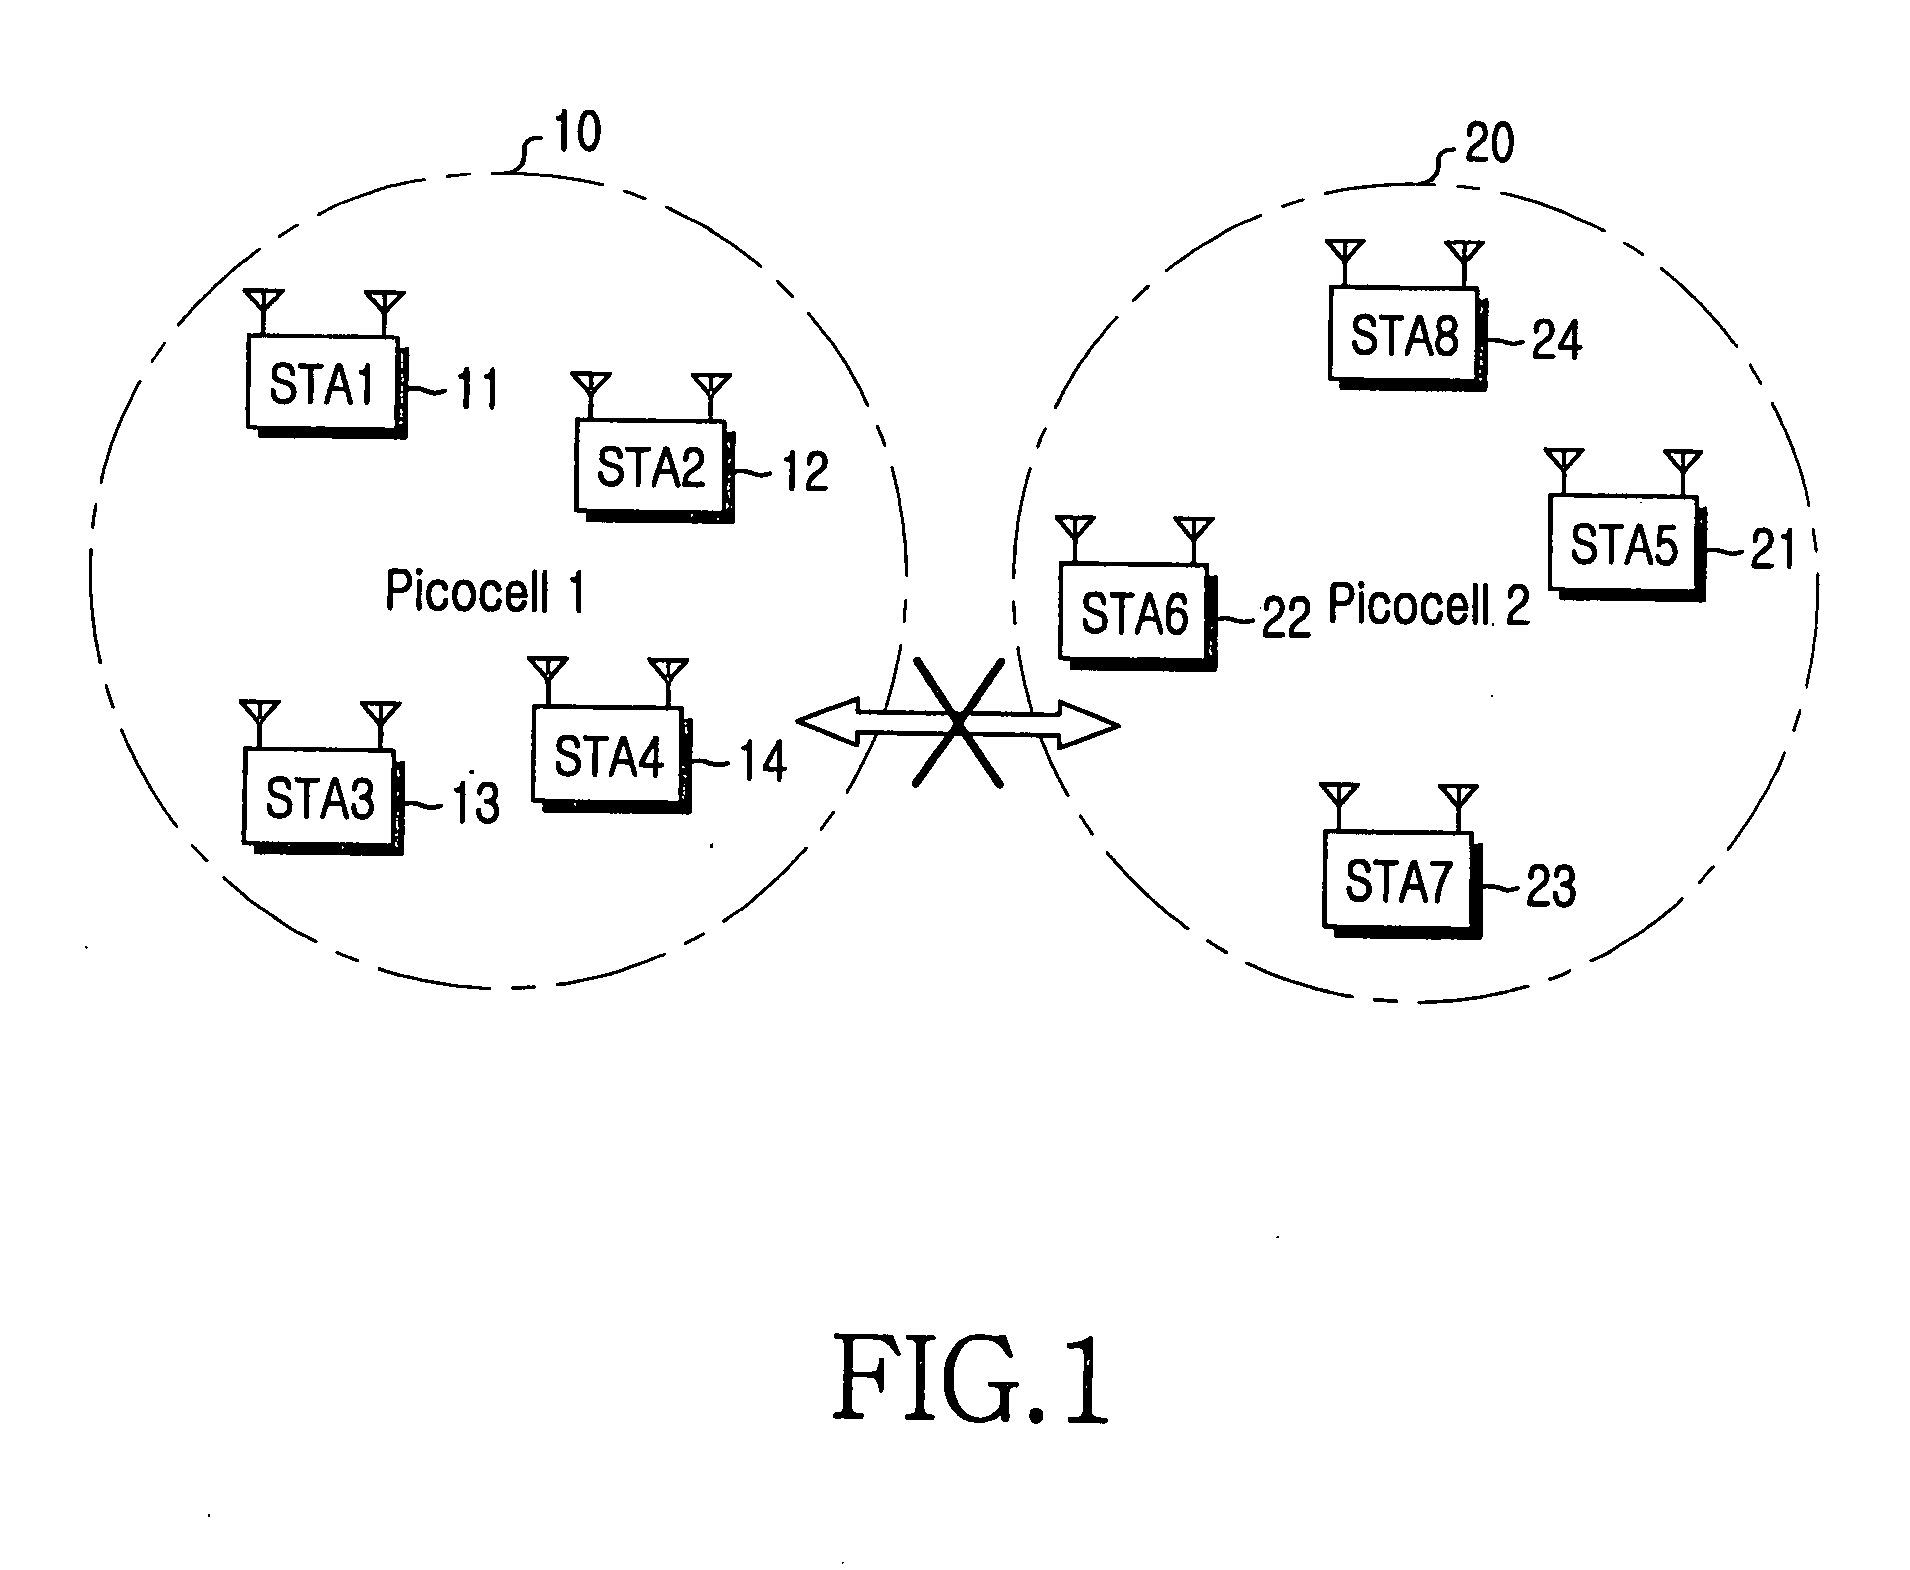 Apparatus for transmitting signals between ultra wideband networks